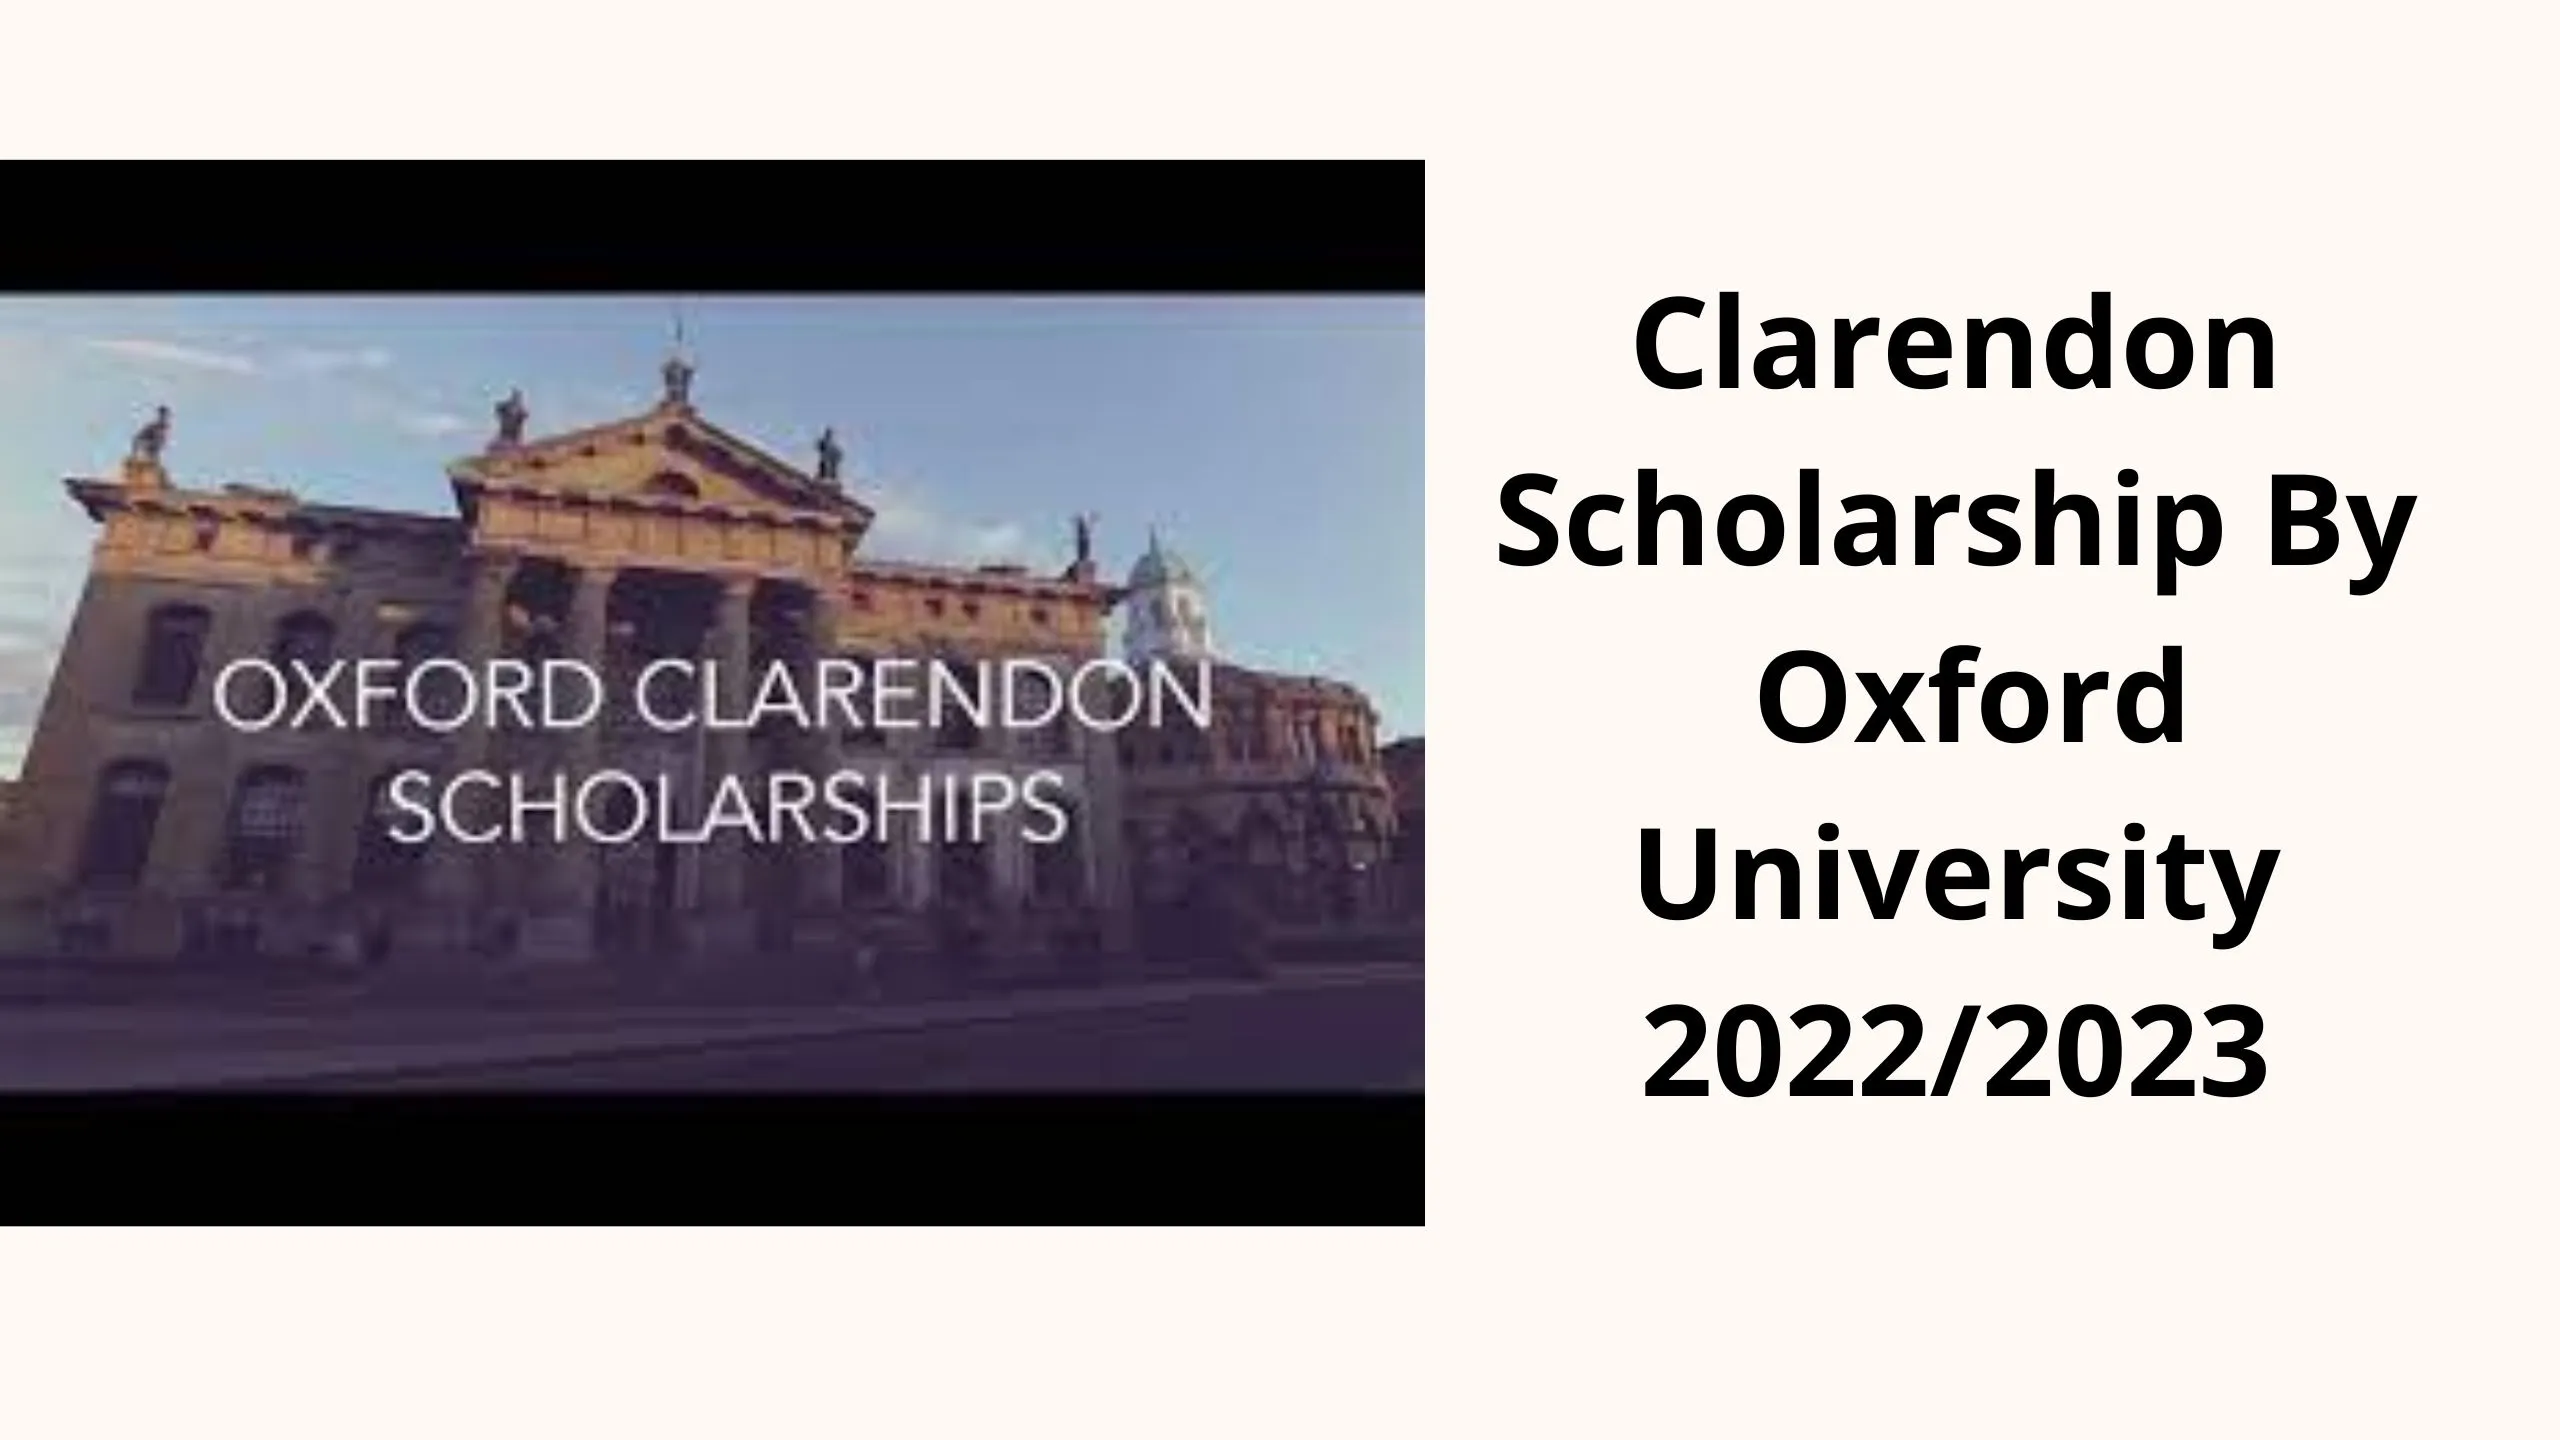 Clarendon Scholarship By Oxford University 2022/2023. Apply Now